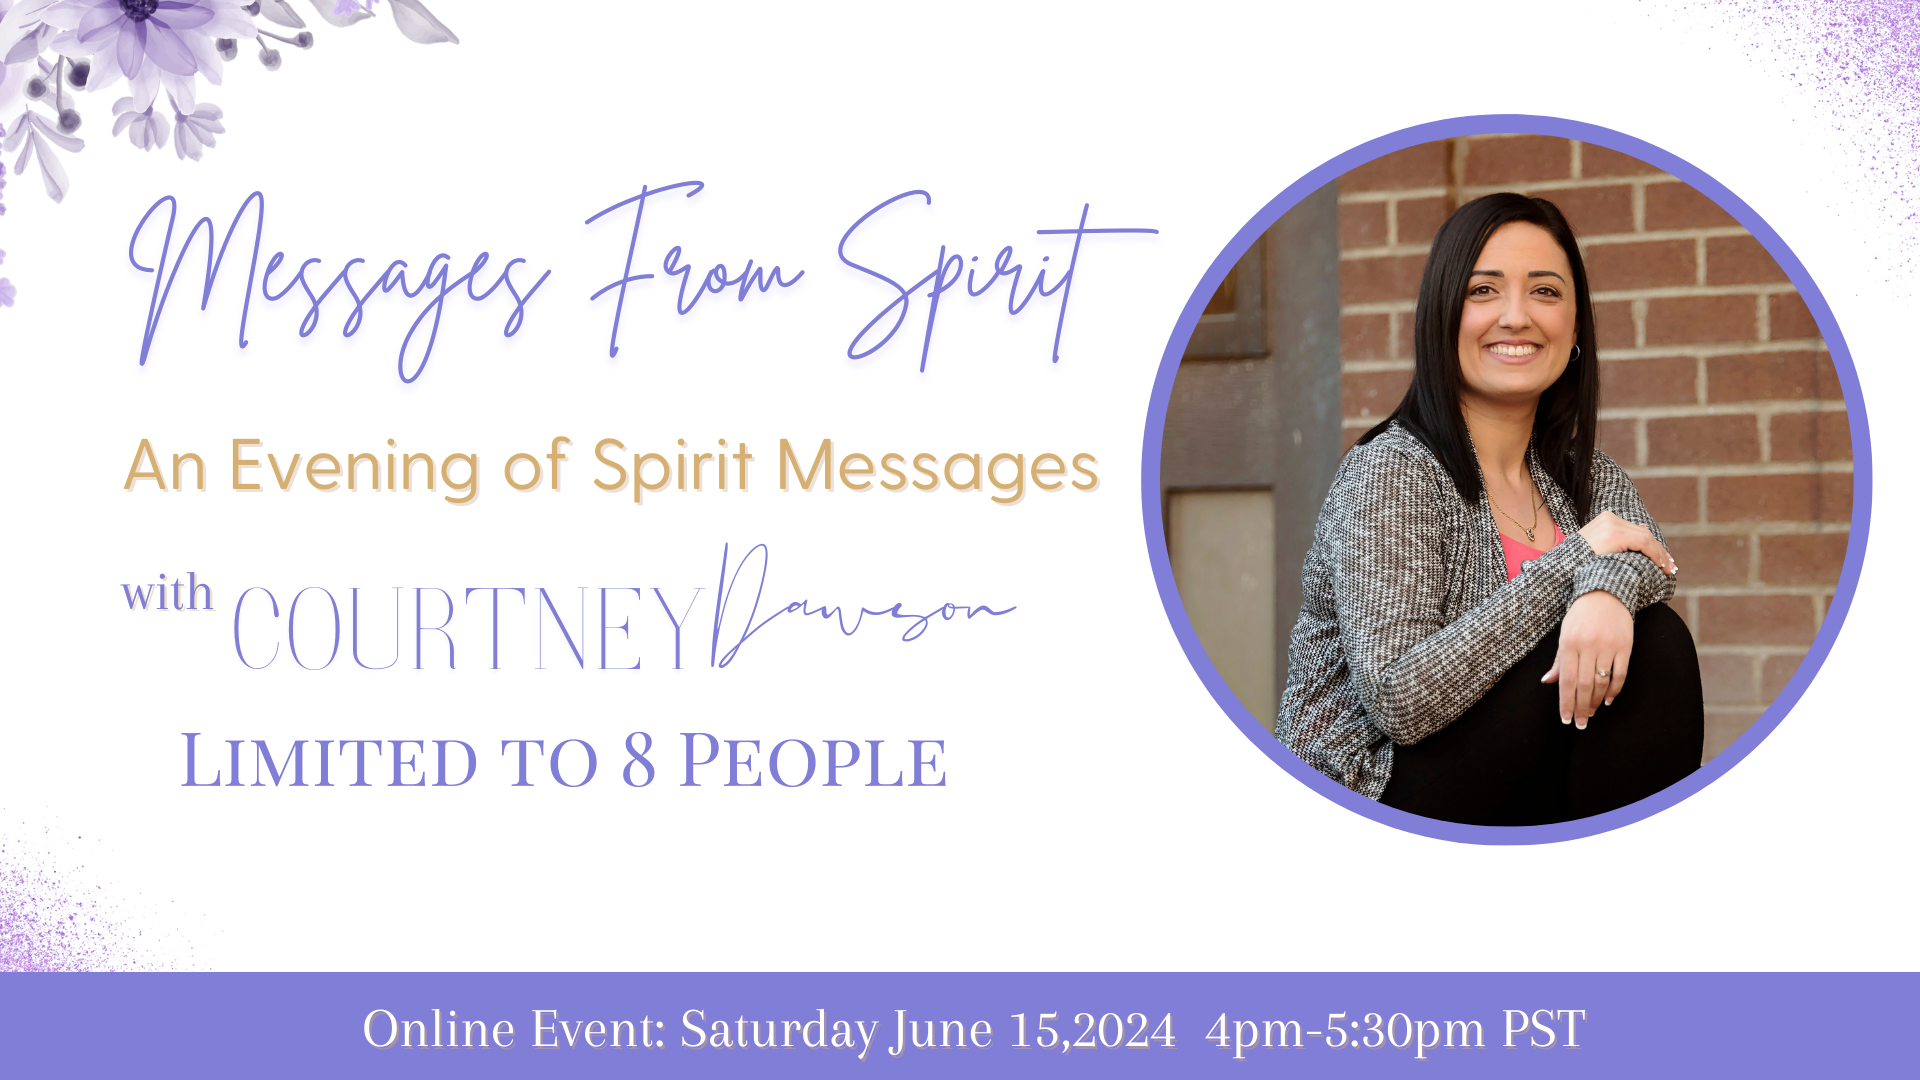 Messages from spirit event with Courtney Dawson